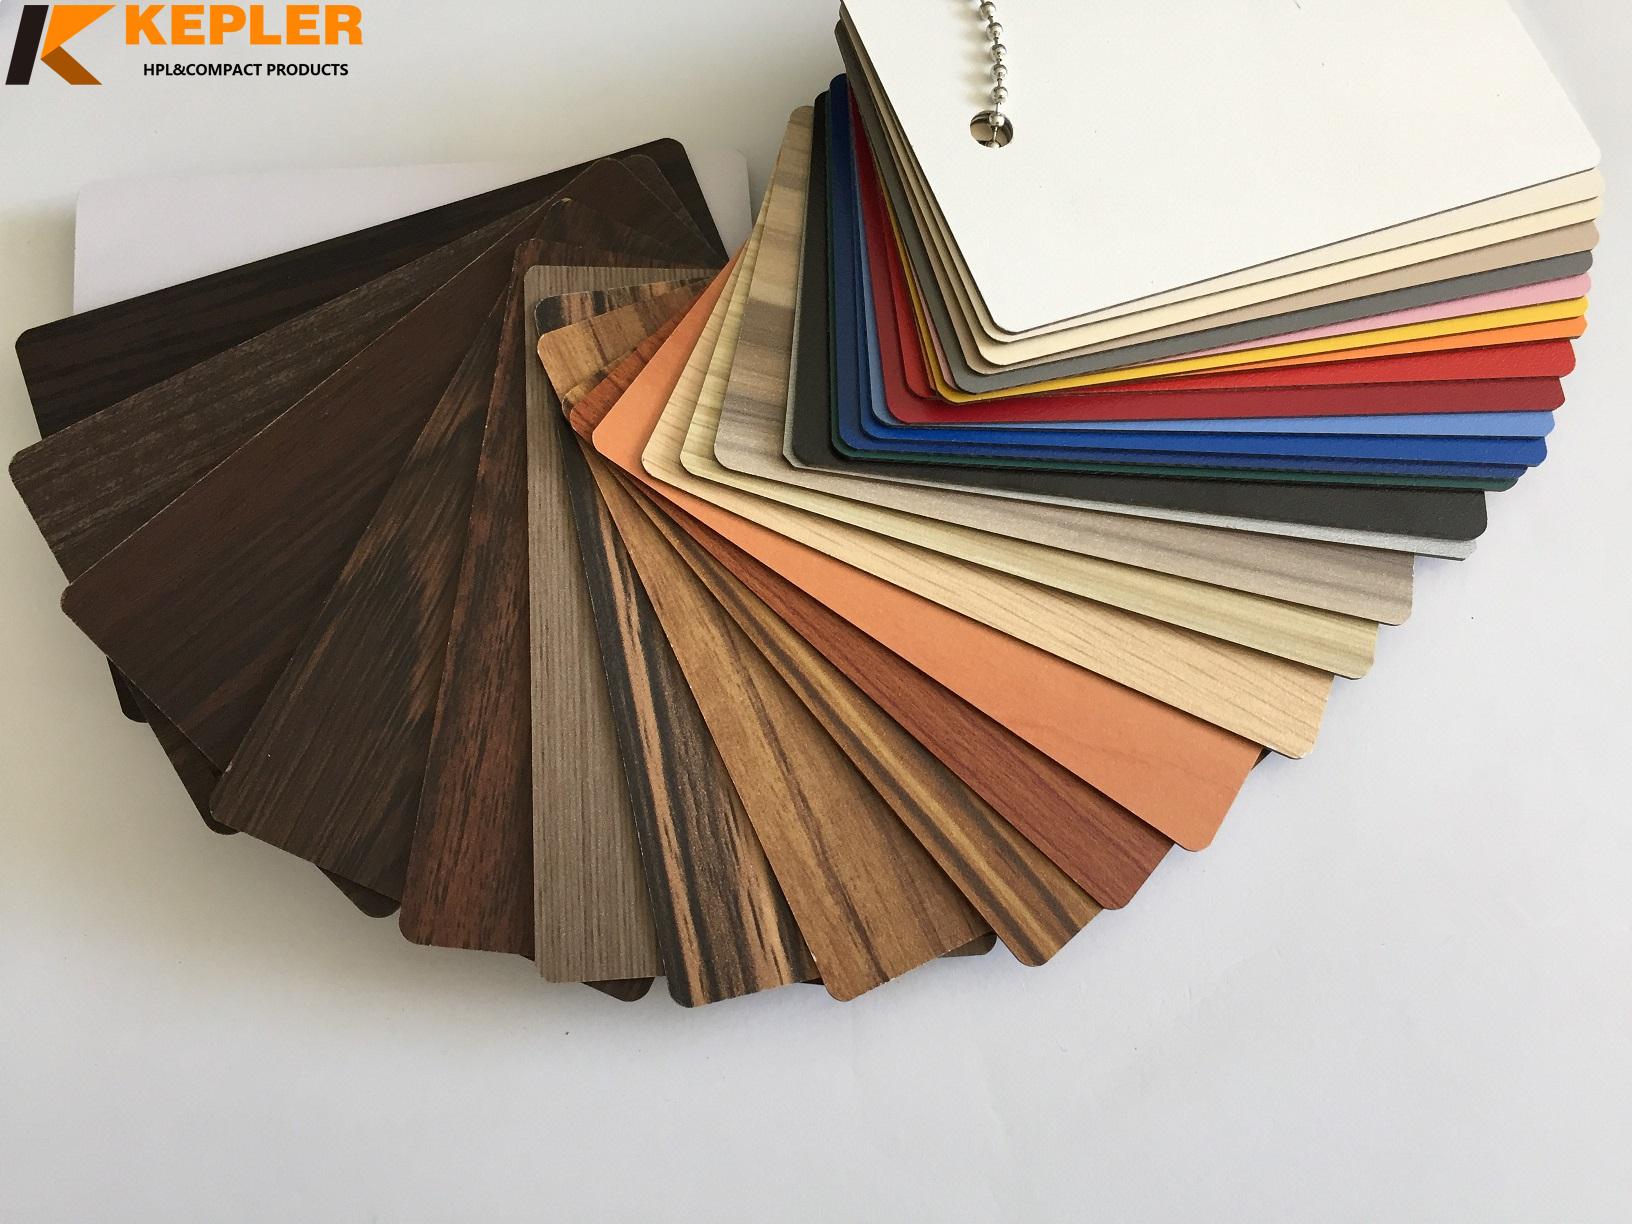 Kepler waterproof high glossy white high pressure laminate hpl sheet covered with plastic protective film